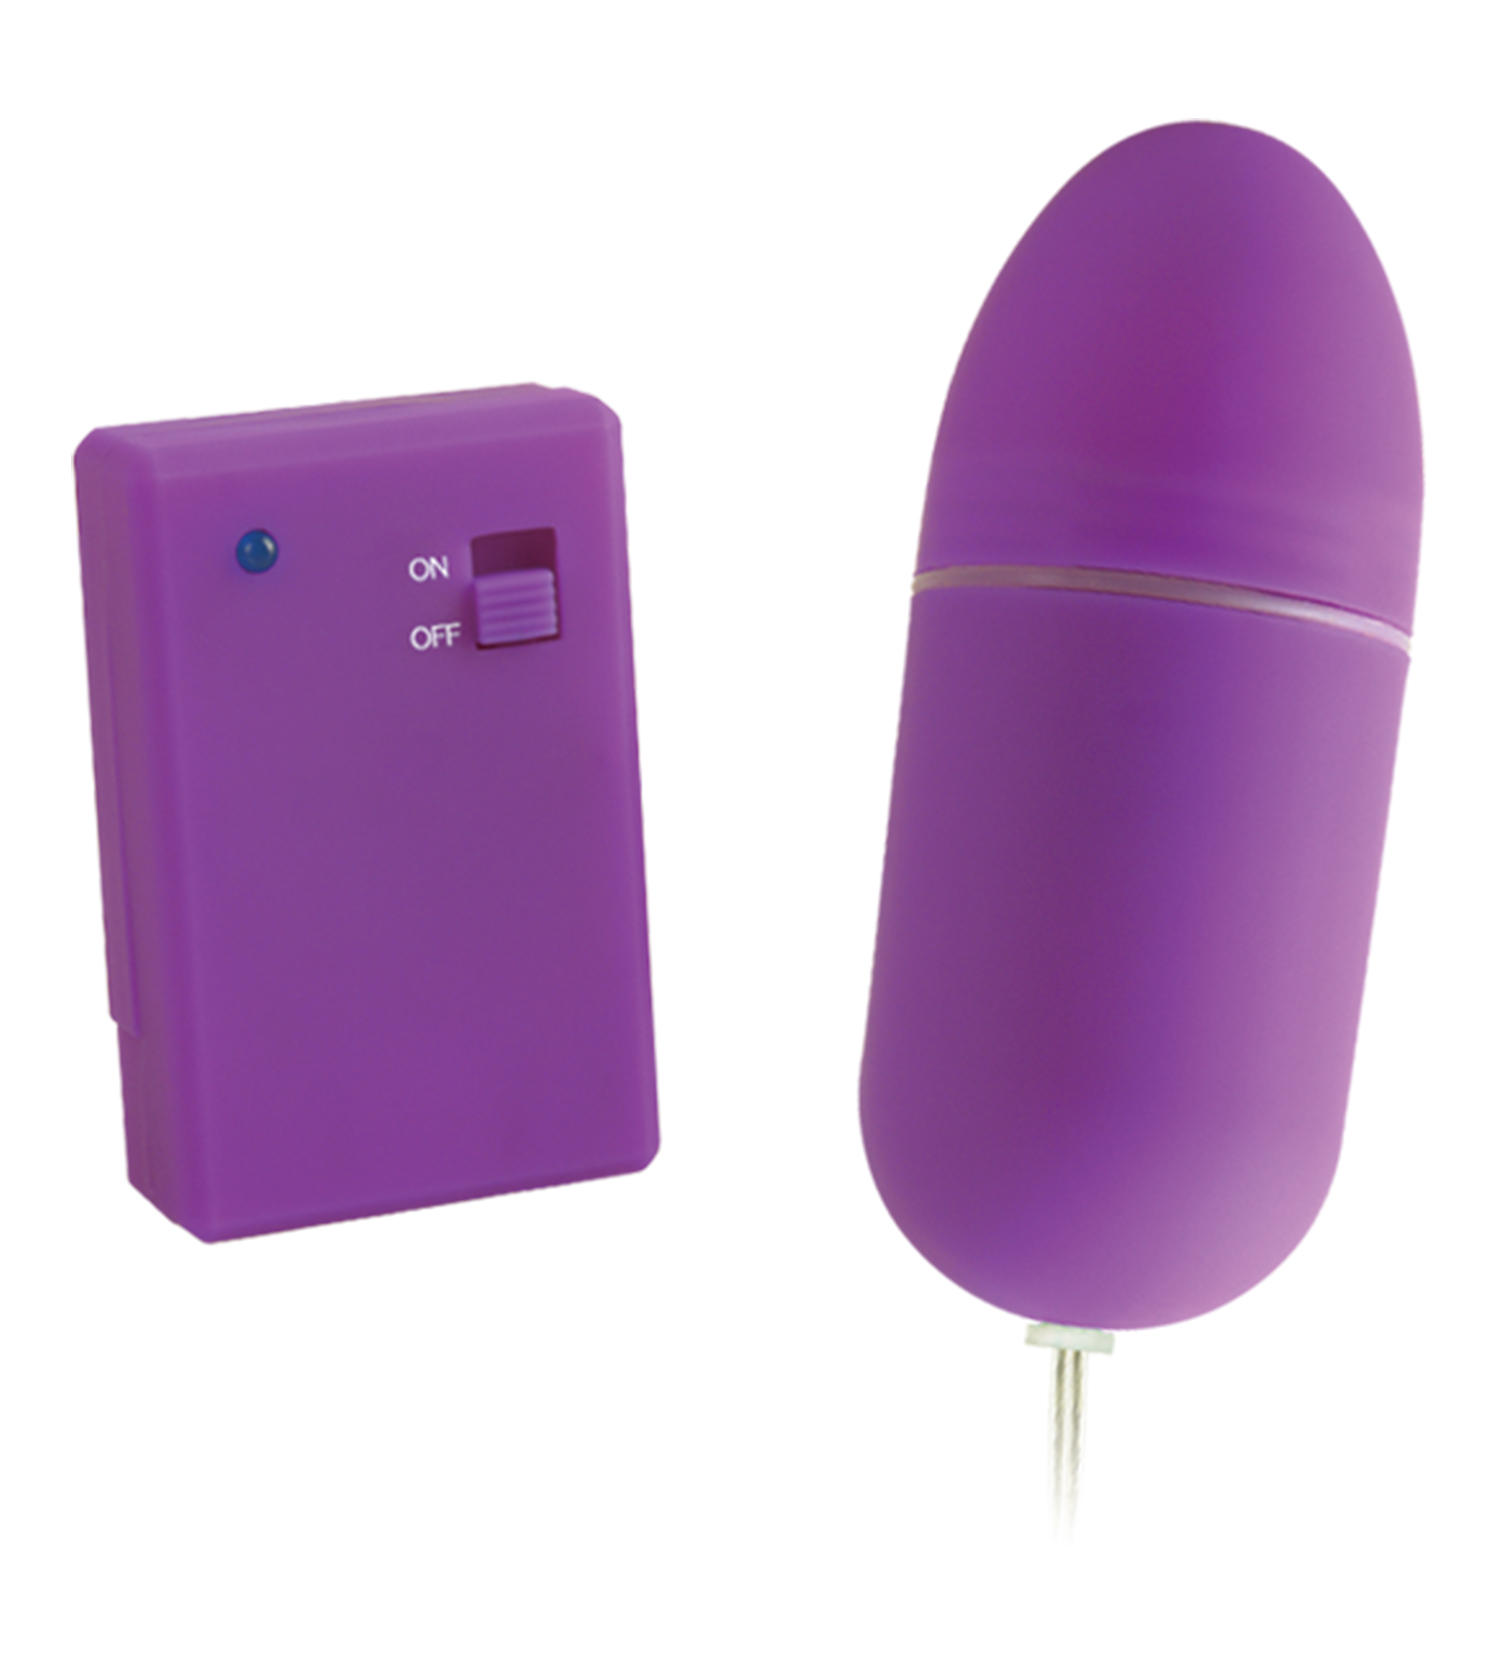 NEON LUV TOUCH REMOTE CONTROL BULLET PURPLE 